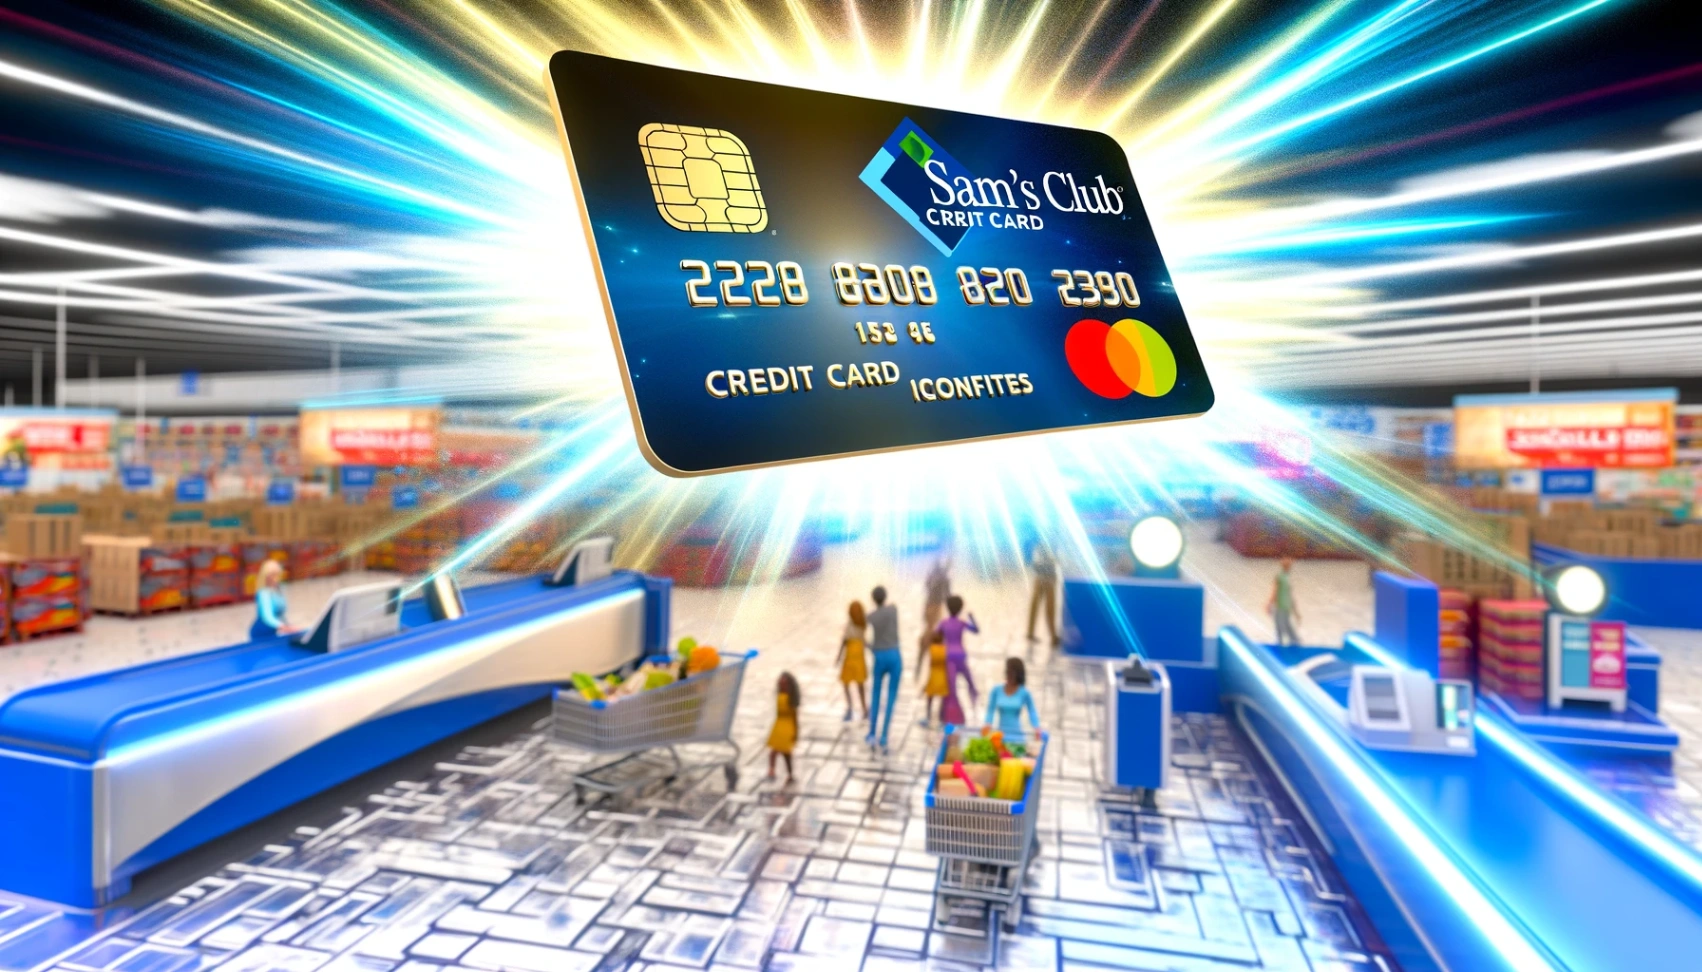 Sam’s Club Card - Exclusive Credit Benefits: Apply Now